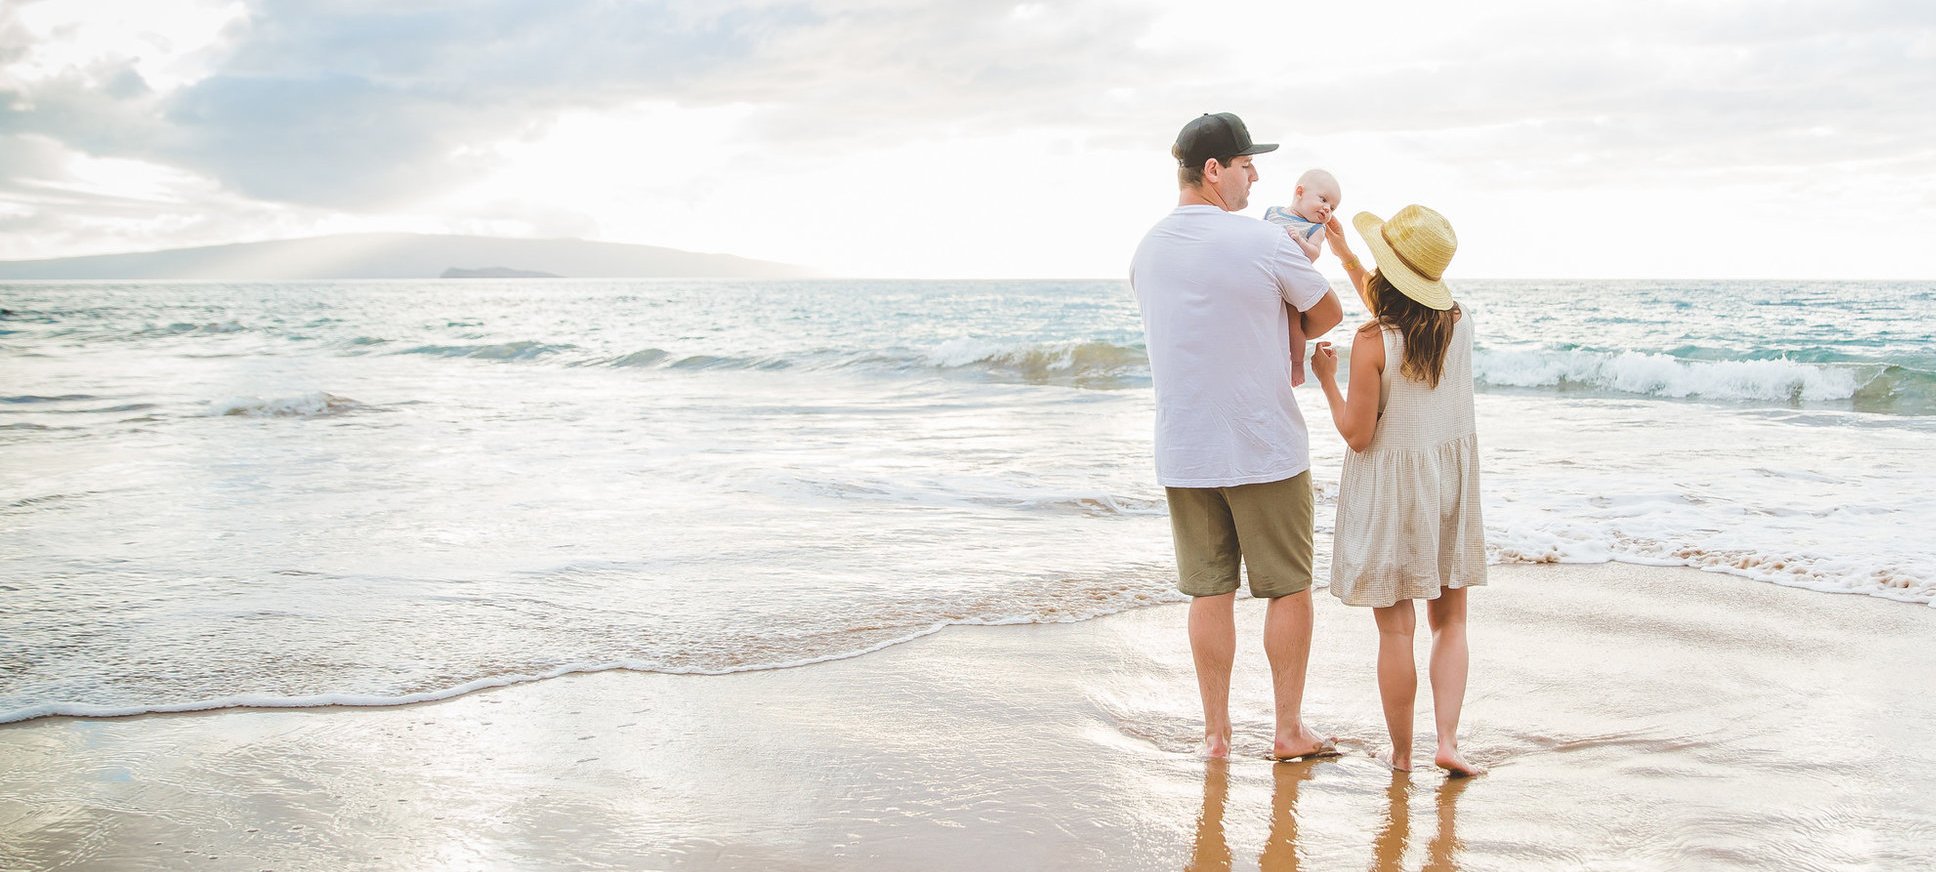 Jillian Harris, her husband and infant son at the beach together on a family photo shoot in Maui